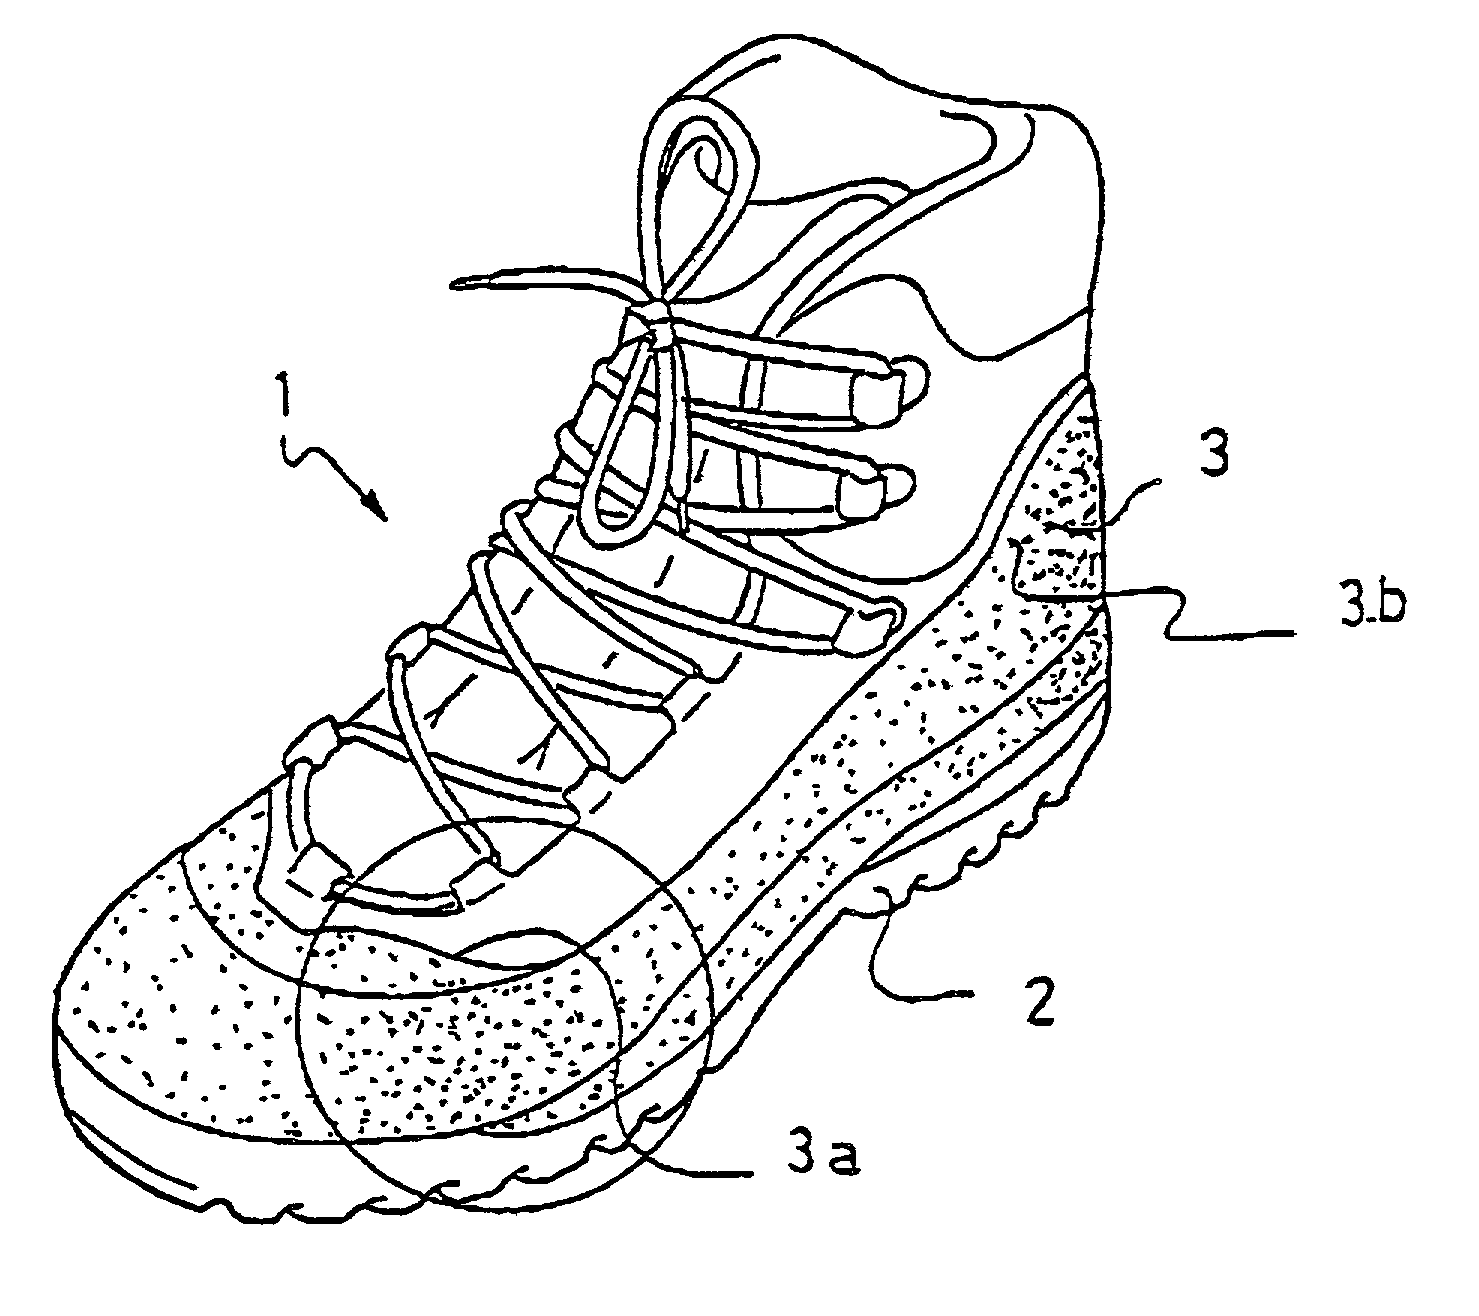 Article of footwear and method of manufacturing same